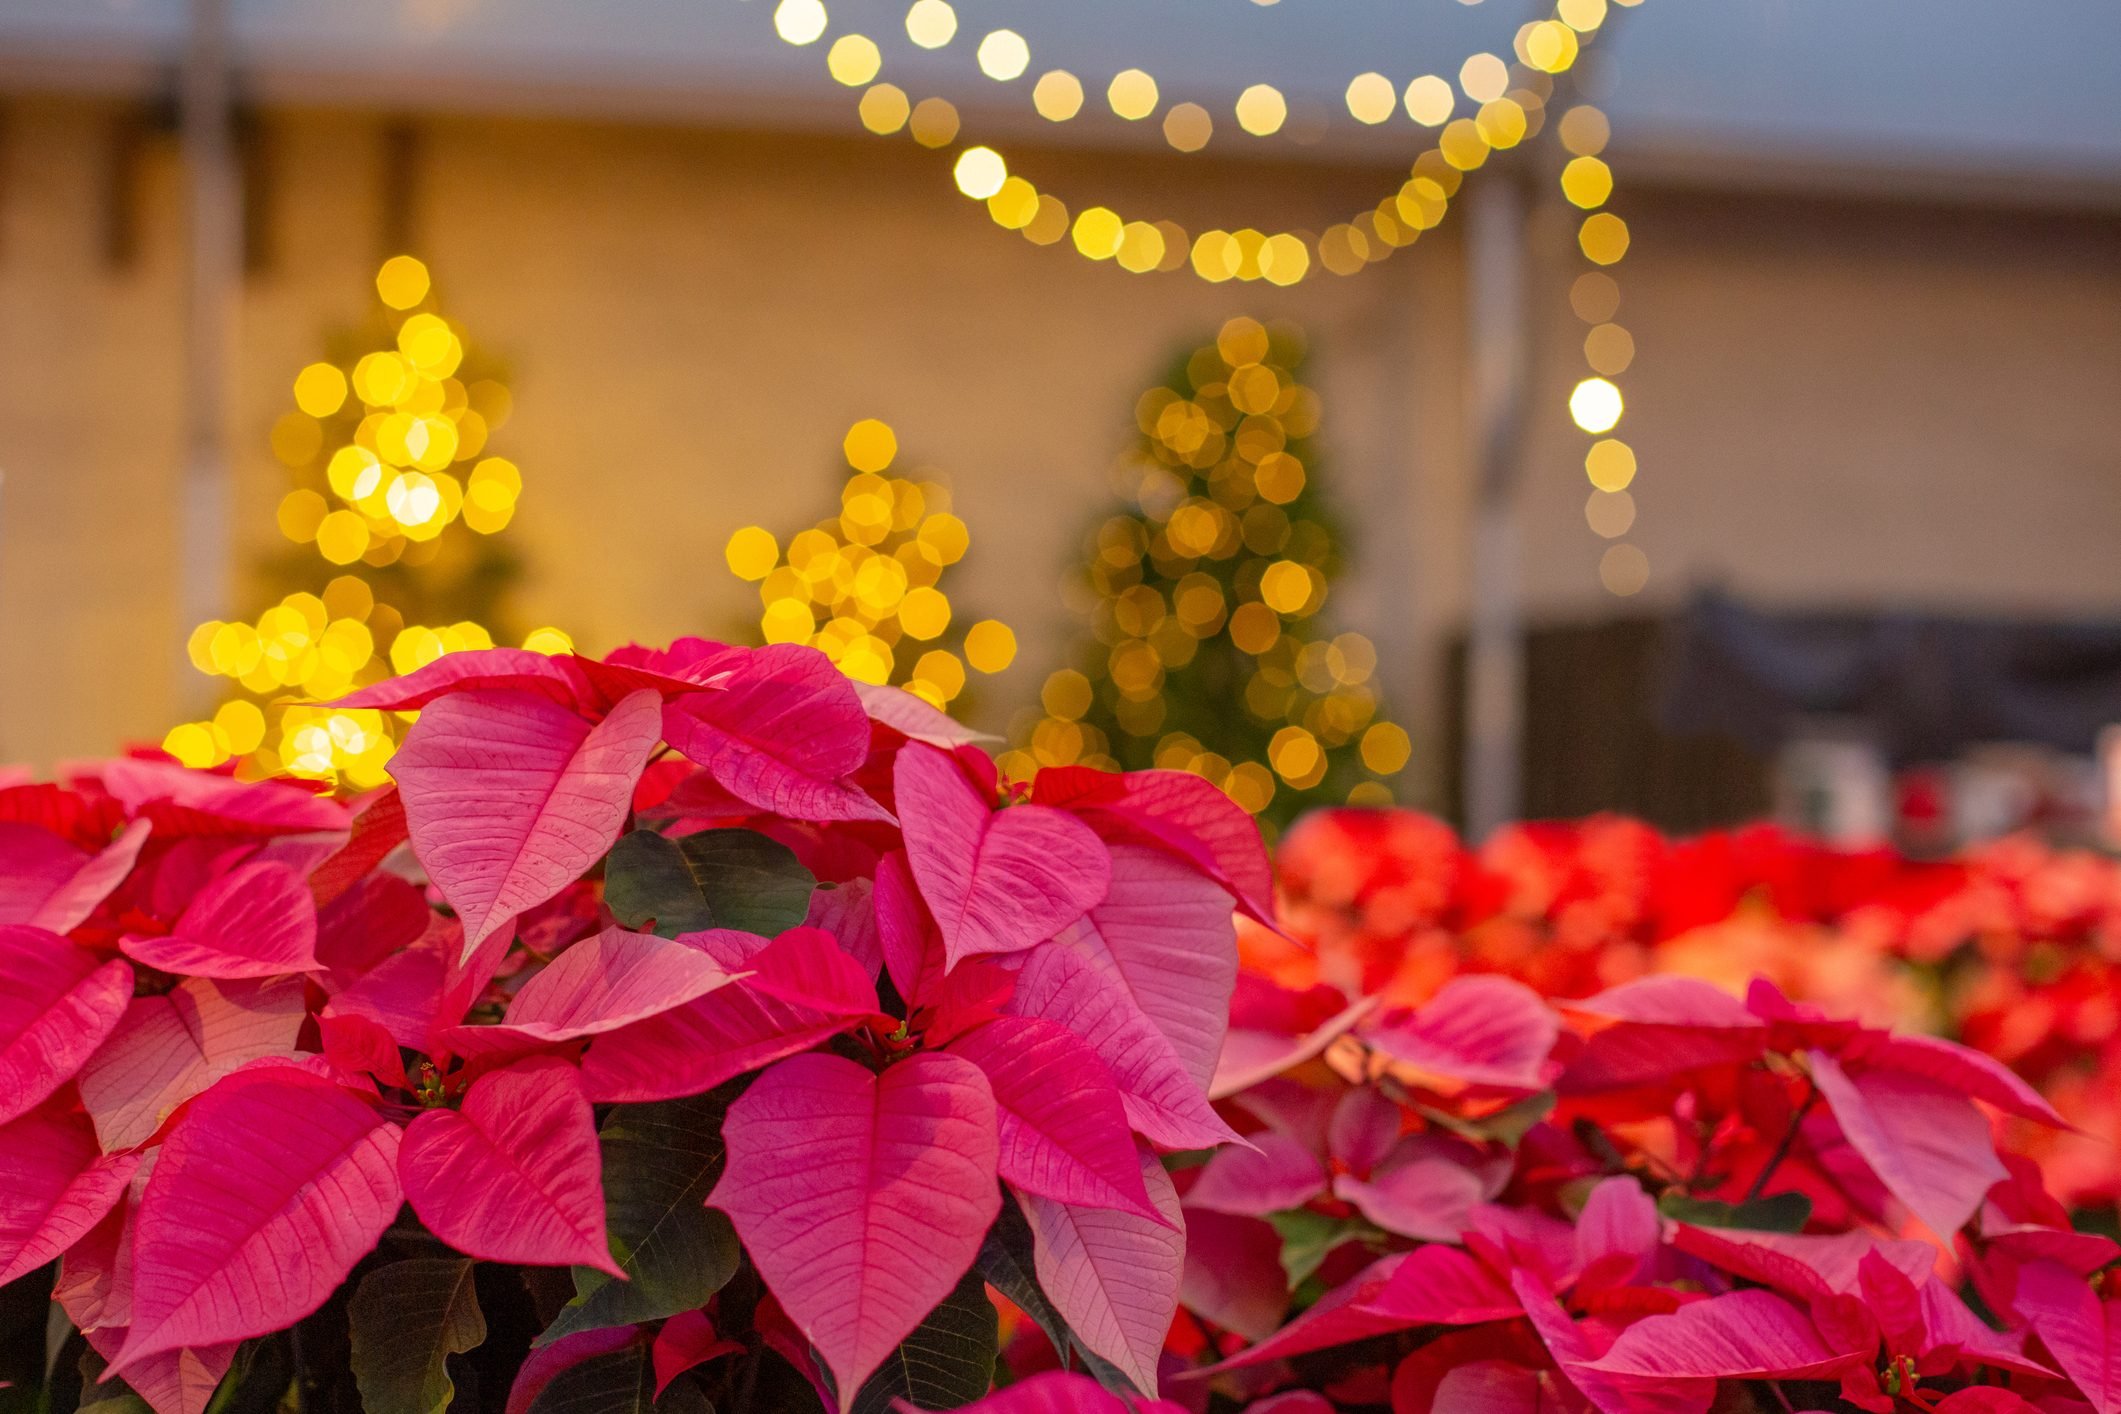 6 Fascinating Facts About Poinsettias